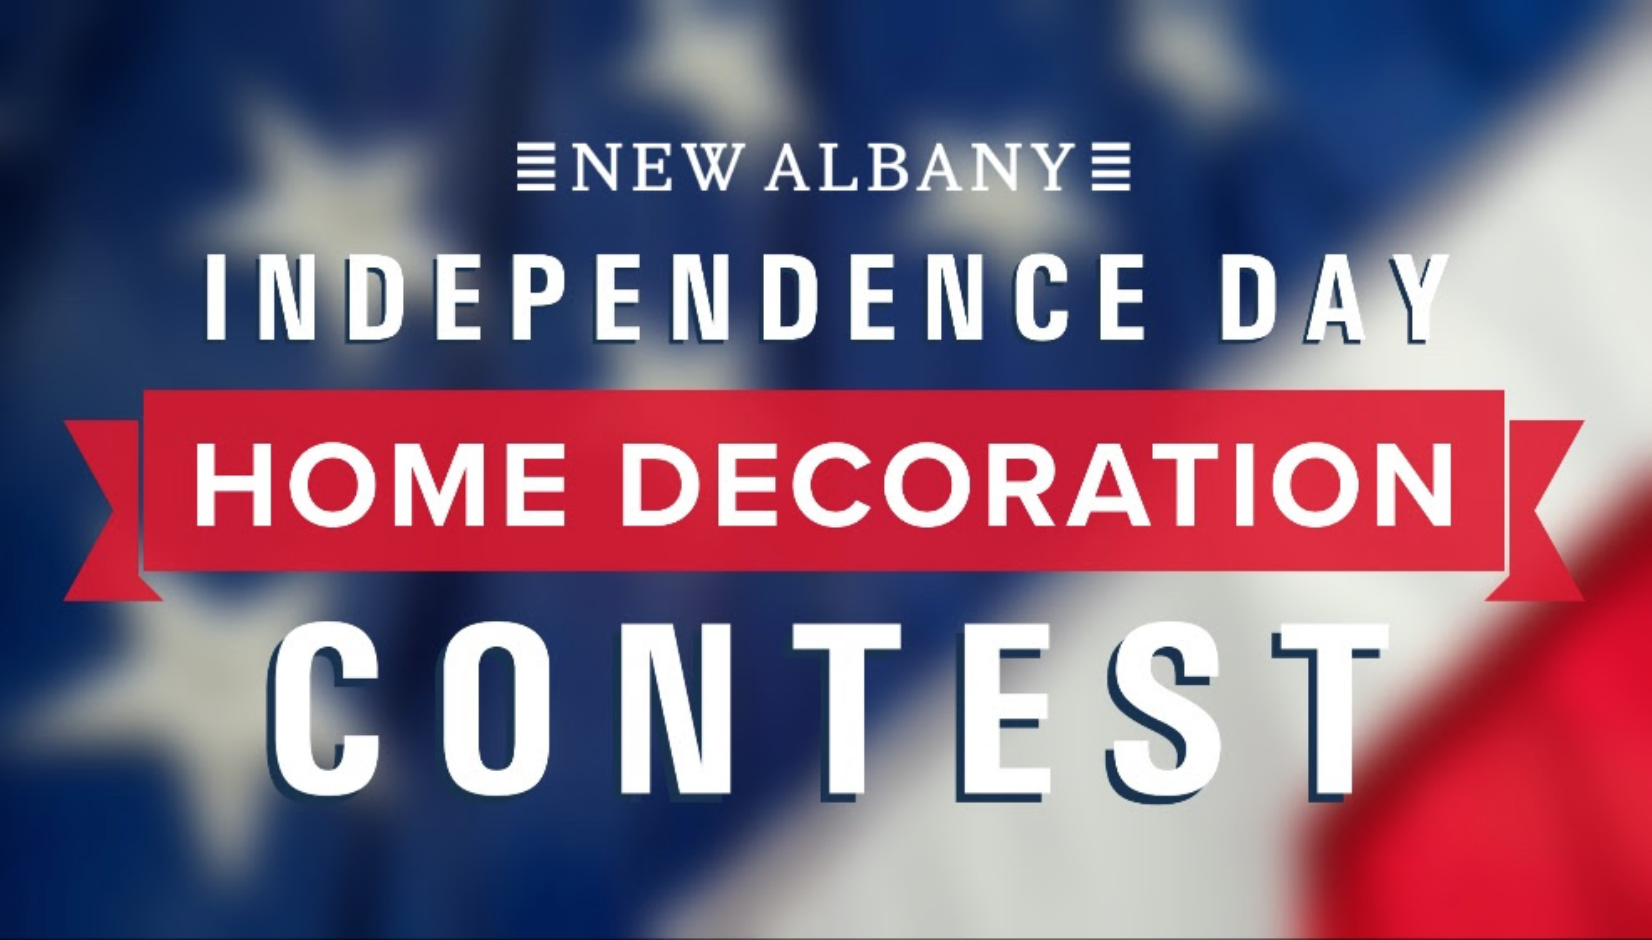 New Albany Home decorating contest